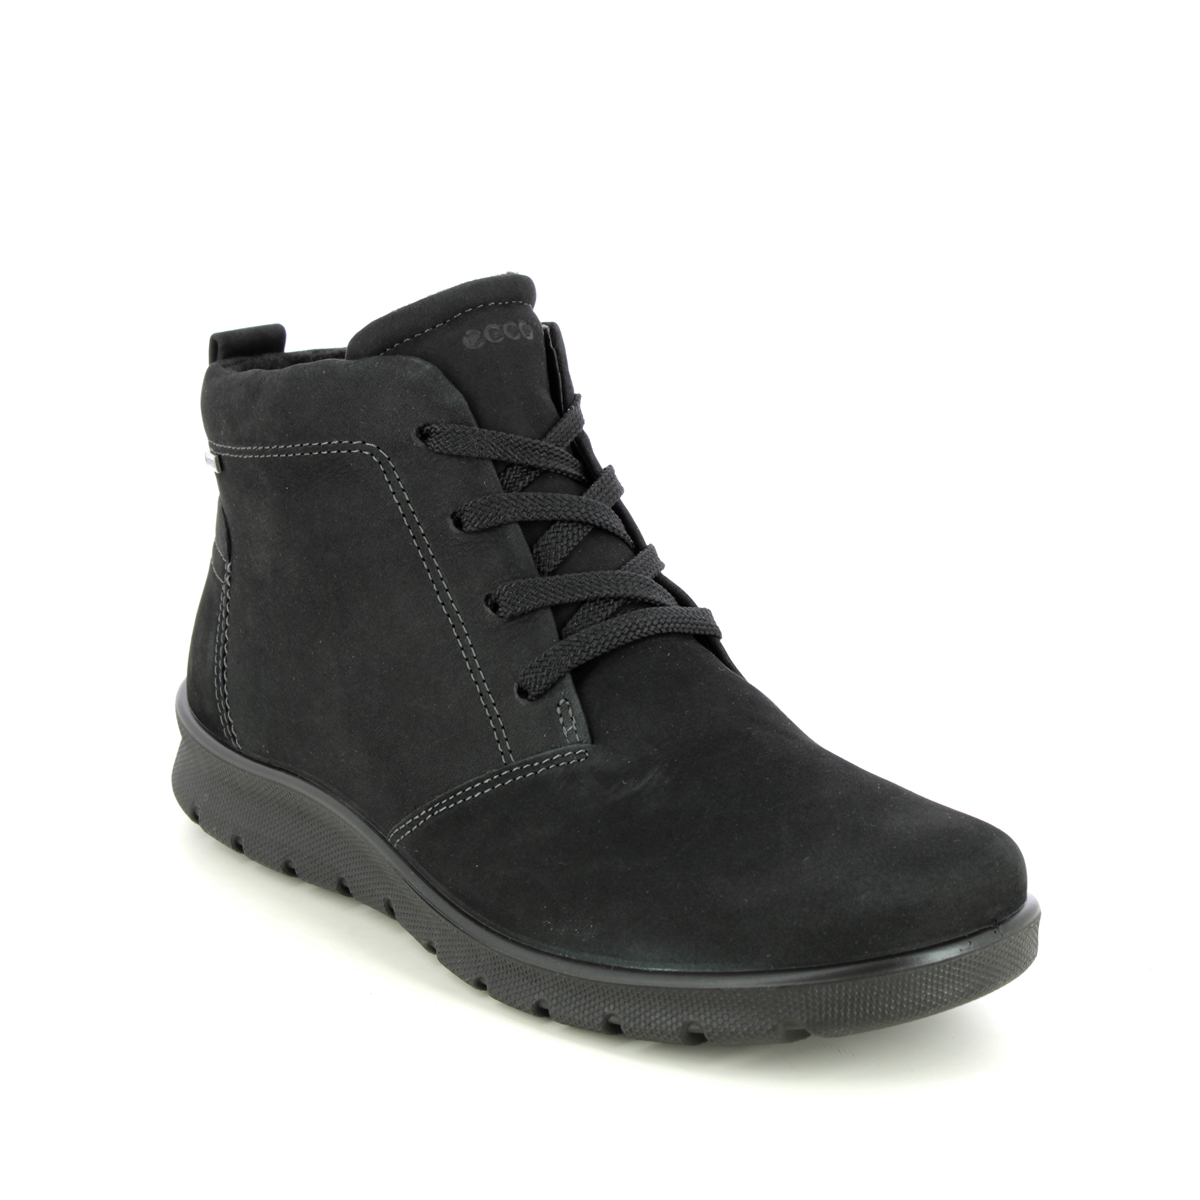 ECCO Babett Lo Gtx Black nubuck Womens Lace Up Boots 215583-02001 in a Plain Leather in Size 39